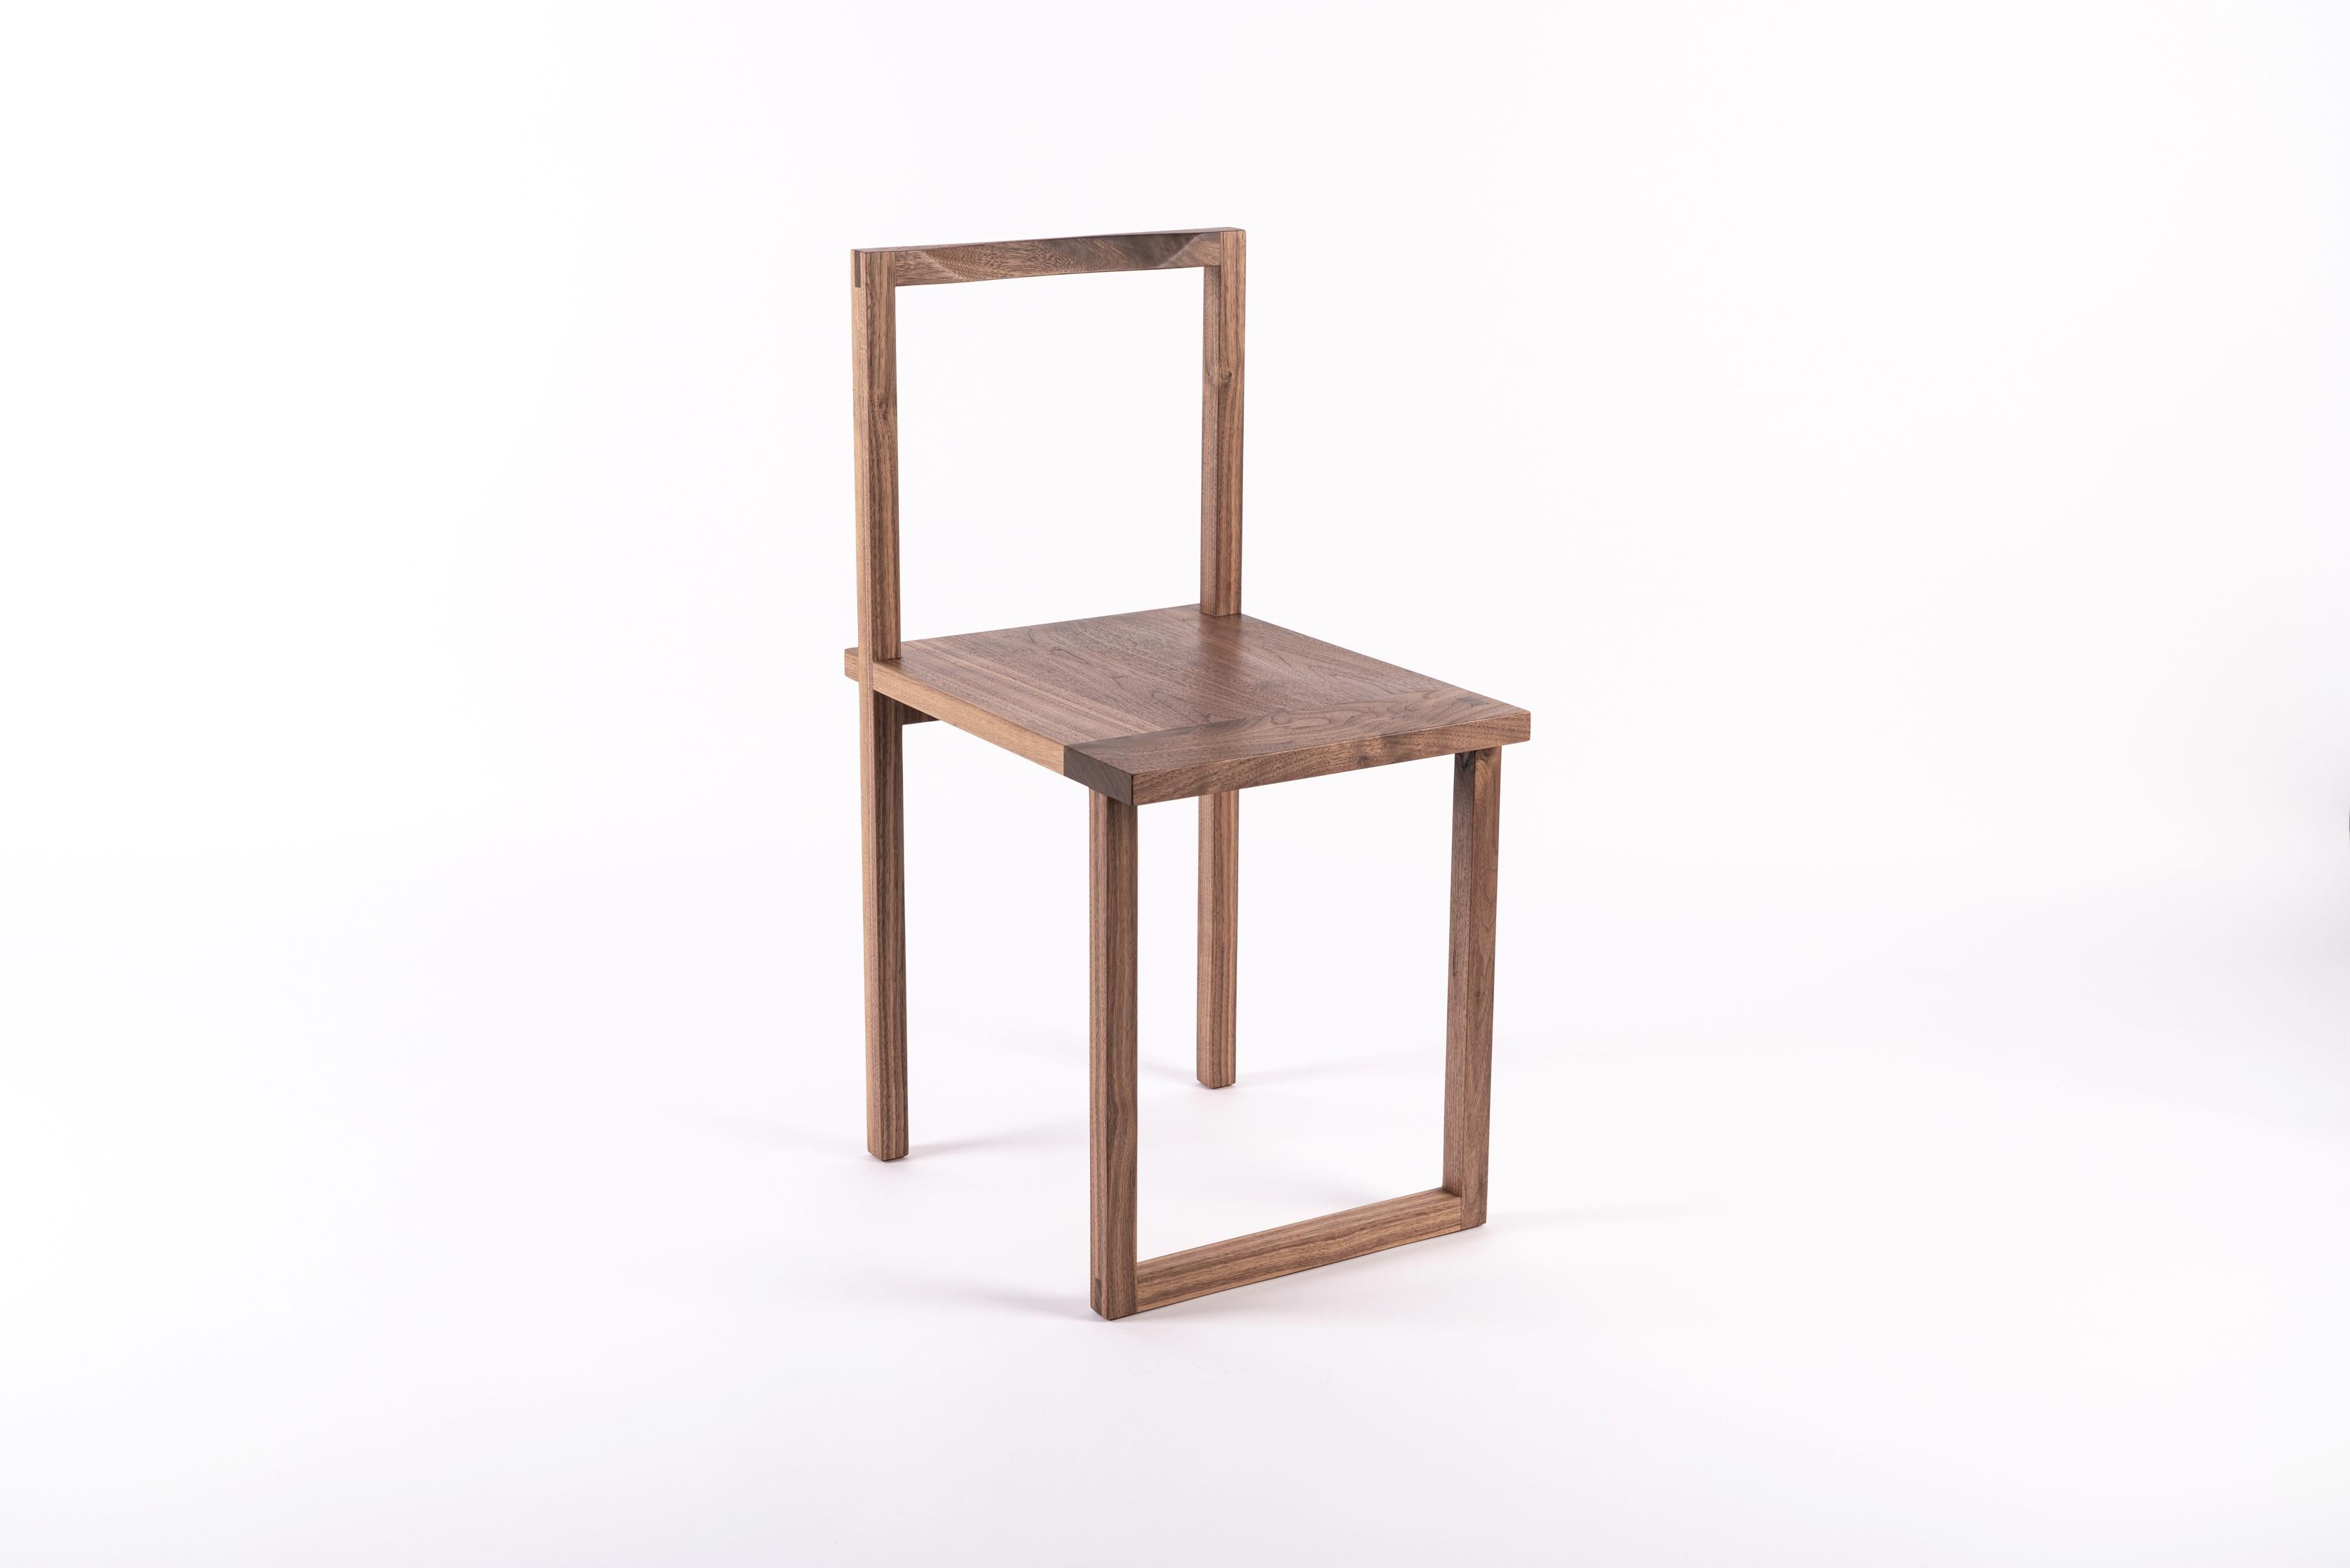 Furniture designer Lee Hojun started his own studio 2017 in Seoul.
He tries to focus on the original, not overly decorated and creates simple forms by subtracting unnecessary. 

Yoei 209 chair stands out horizontality and verticality.
It looks